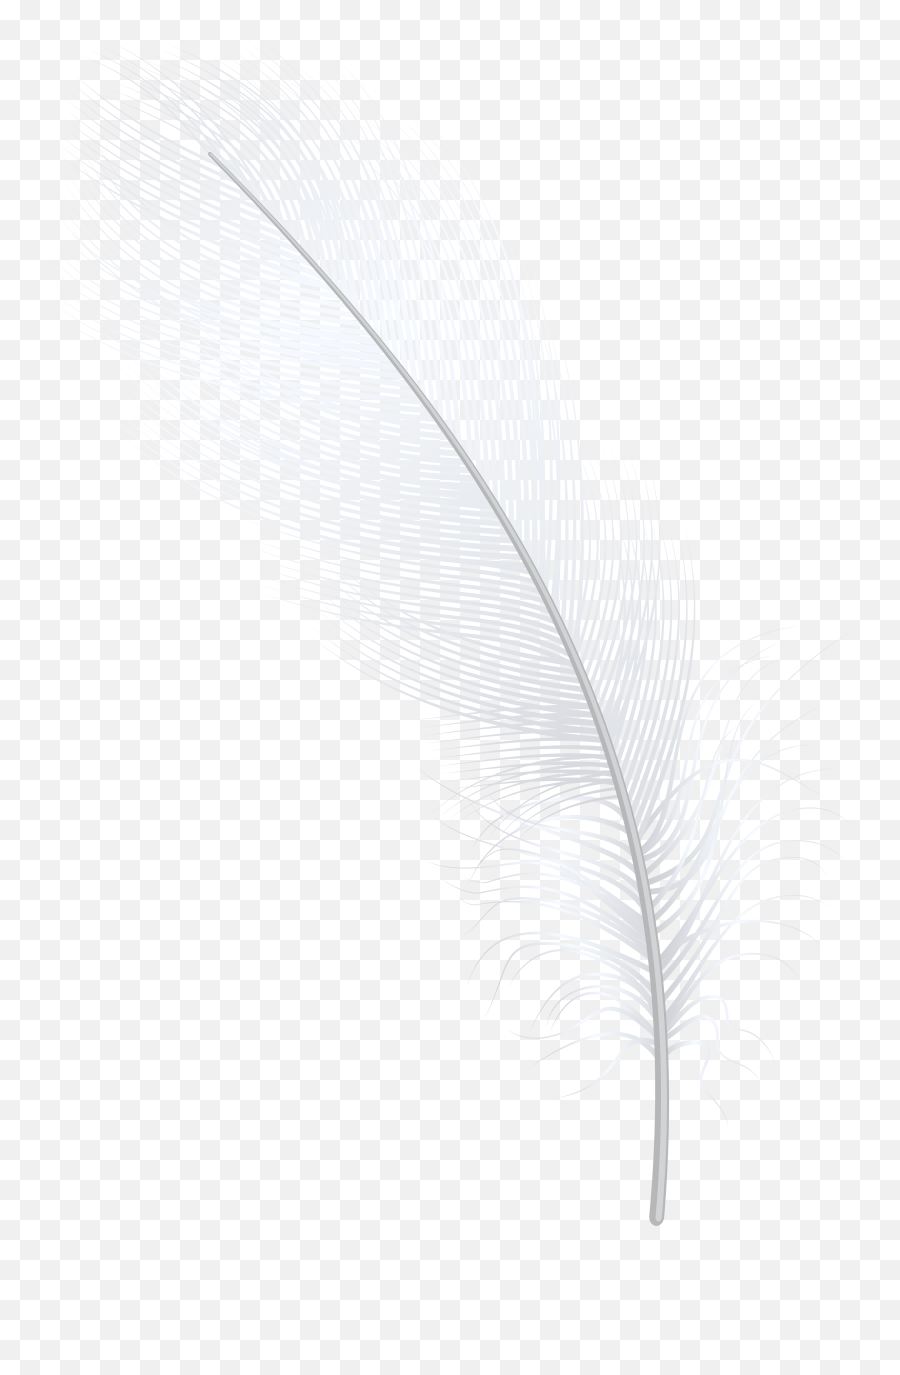 Download Hd Feather White Png Clip Art - Darkness Emoji,Feathers Clipart Black And White